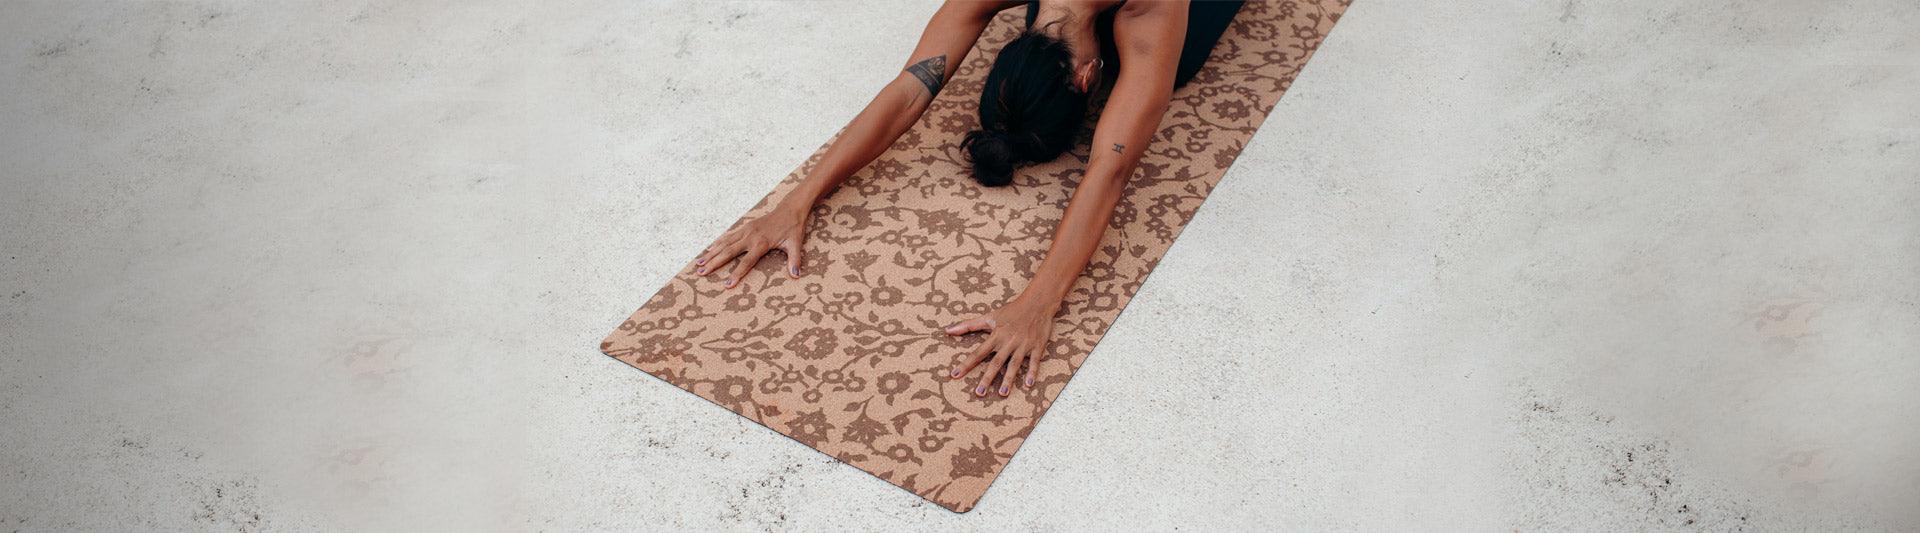 YDL Cork Yoga Mats Collection | Comfortable and Sustainable - Yoga Design Lab 